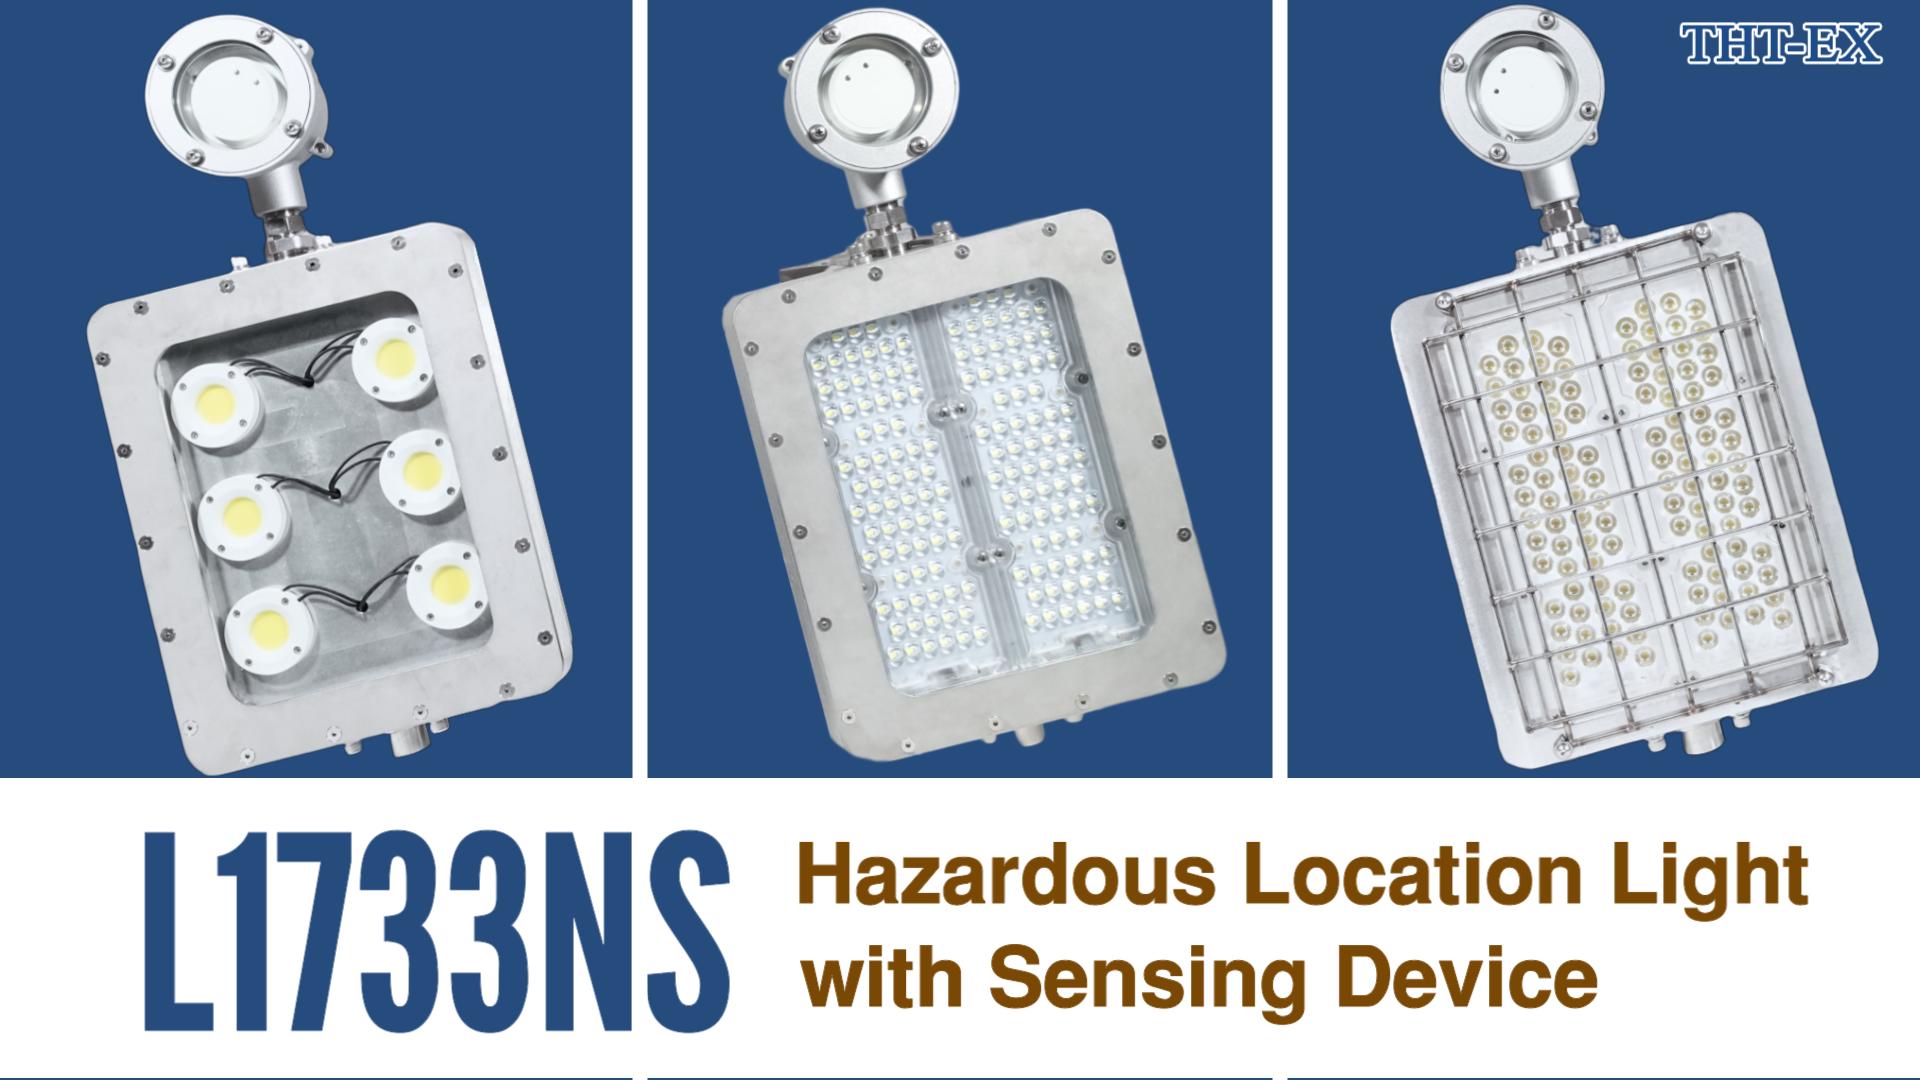 N.A. UL Certified Explosion-proof LED Light with Sensing Device - Model L1733NS